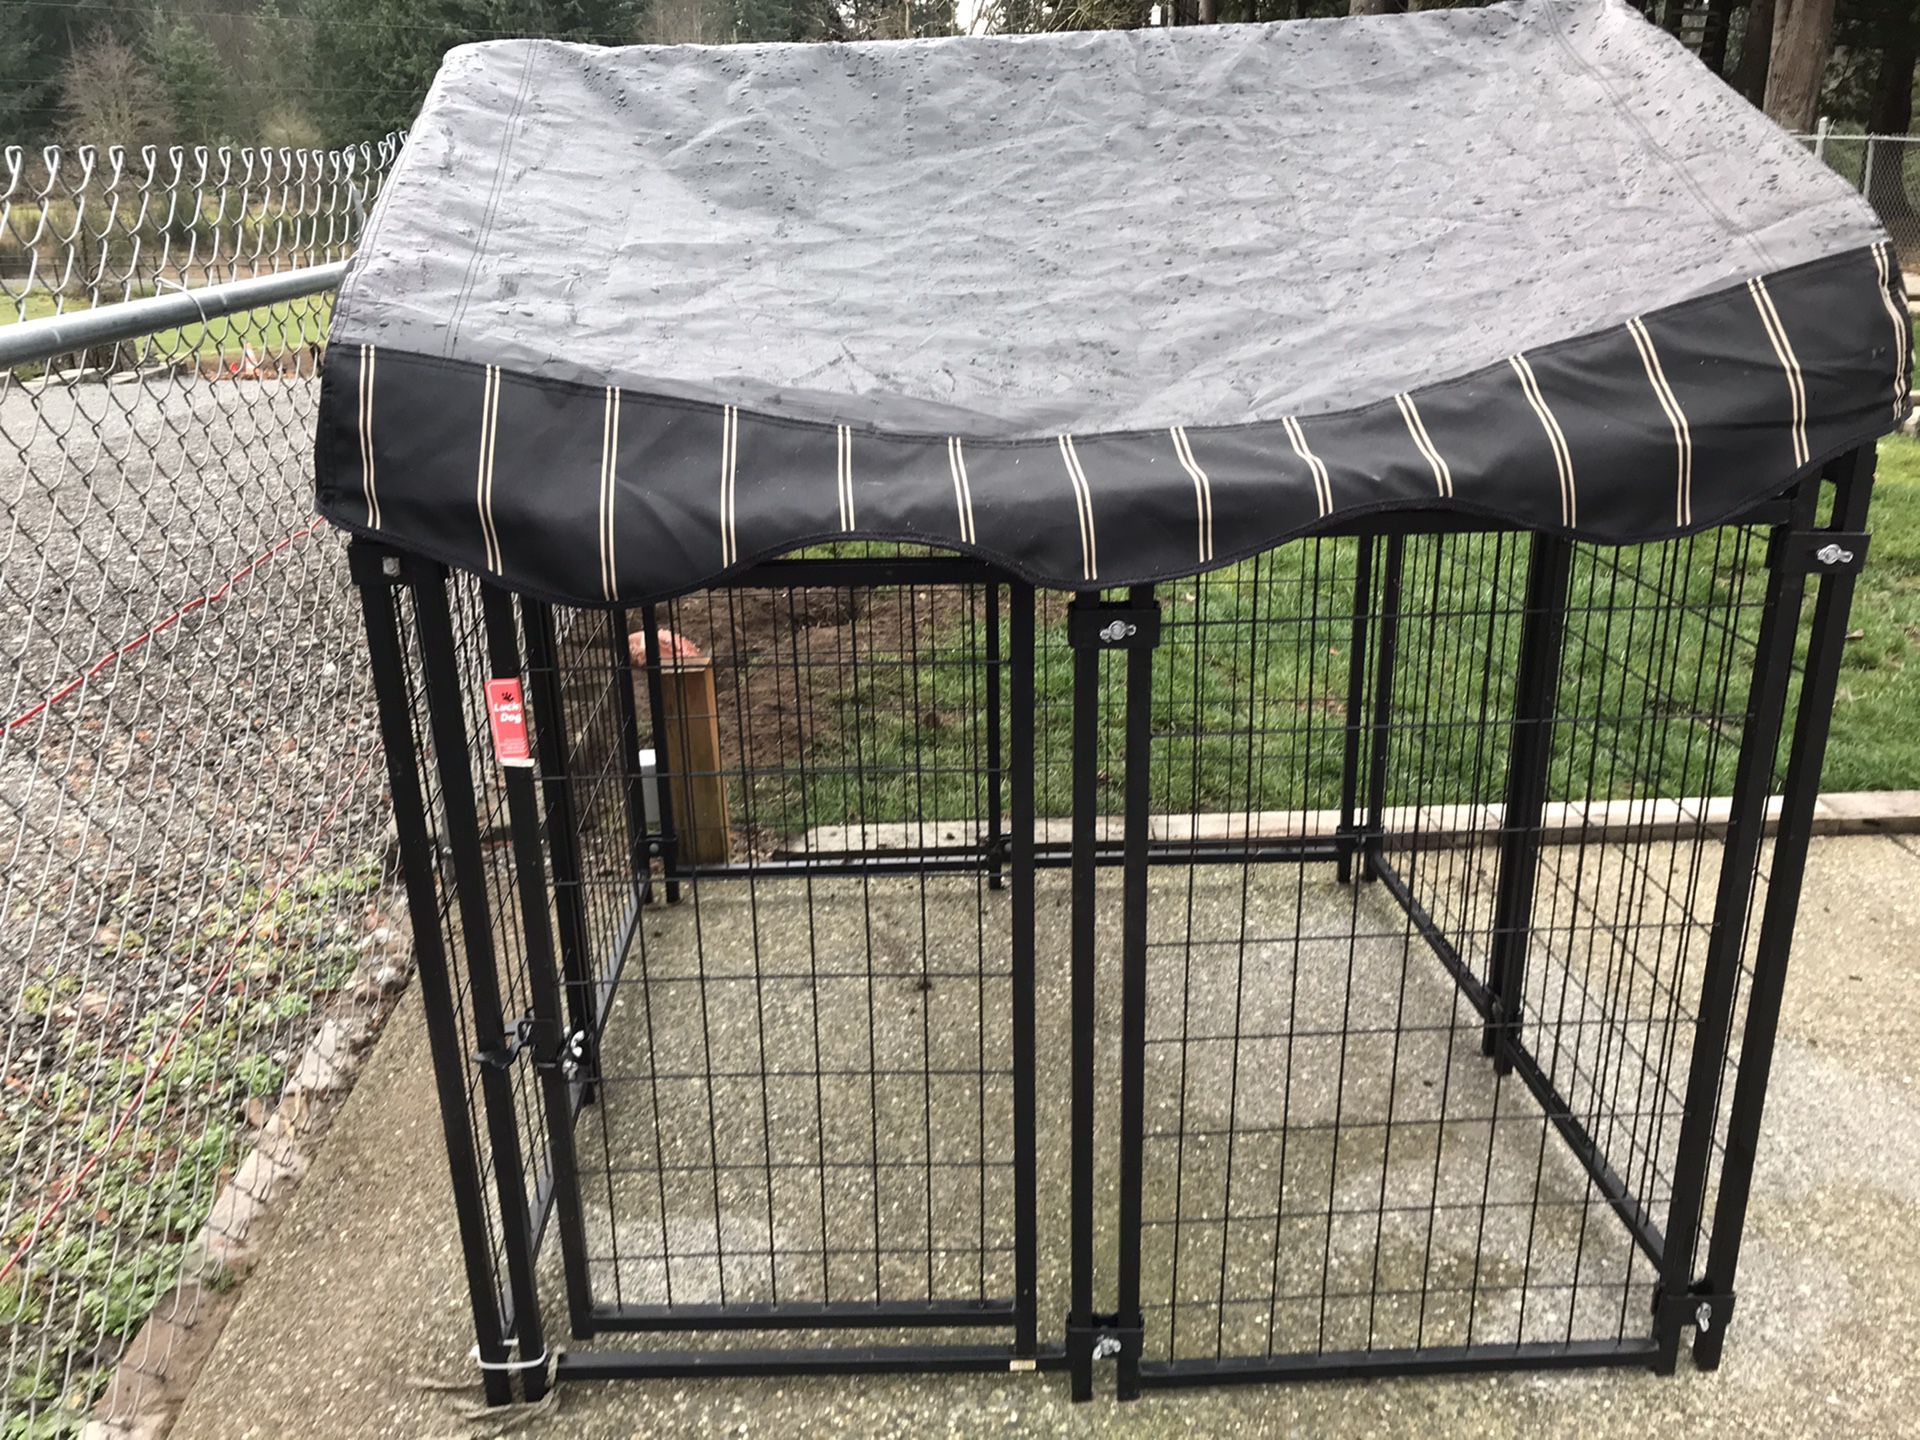 Lucky Dog Kennel